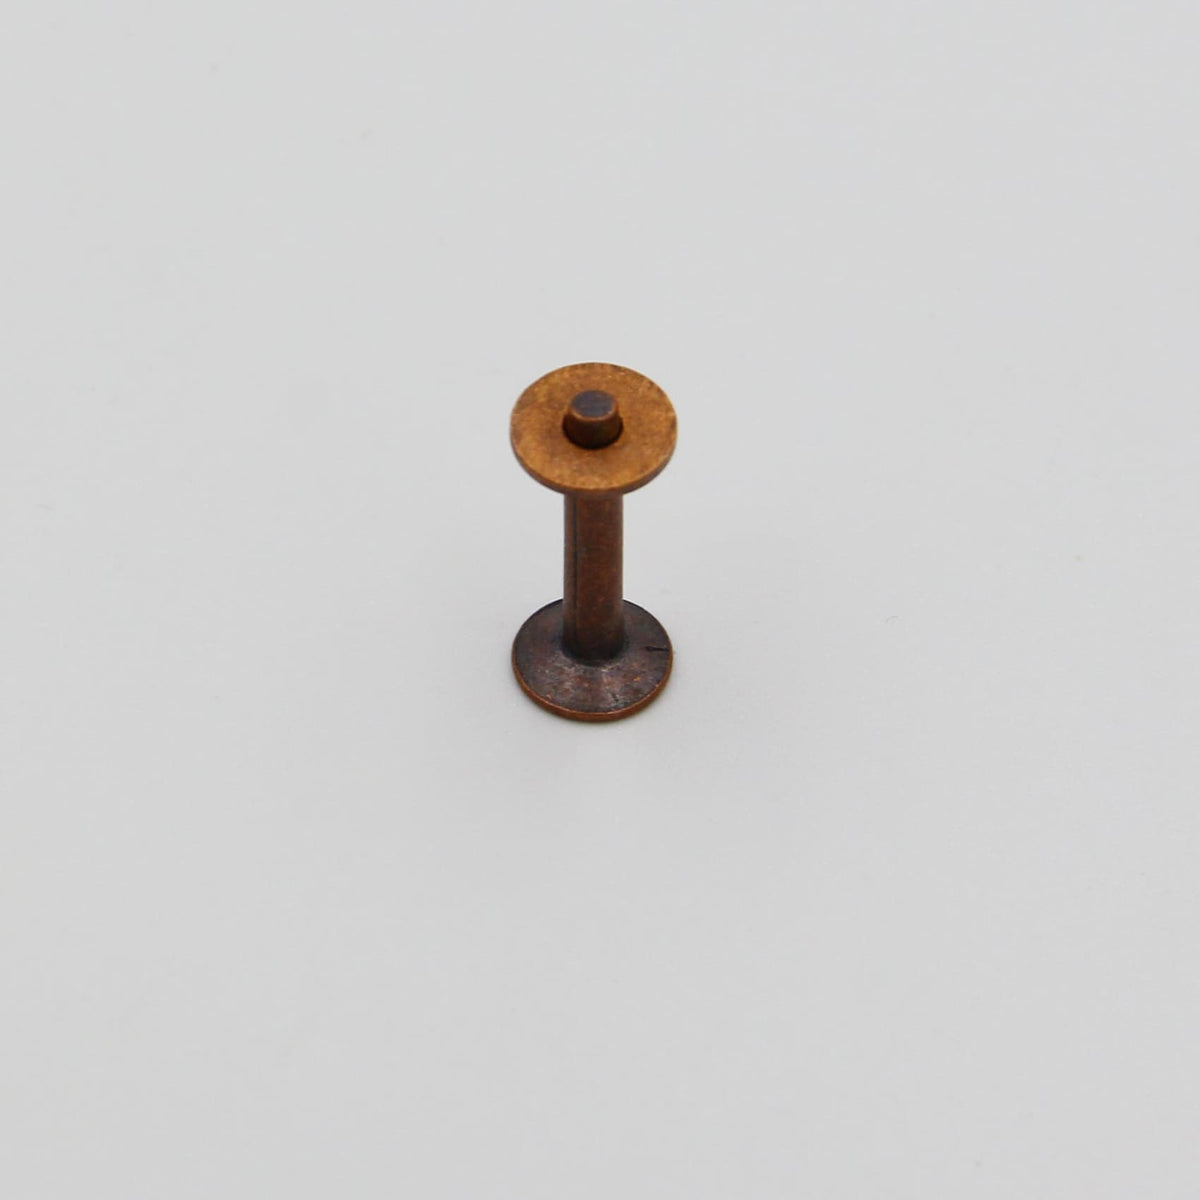 Red Copper Rivets With Burrs,Leather Fastener Rivet,Wood Work Binding –  Metal Field Shop